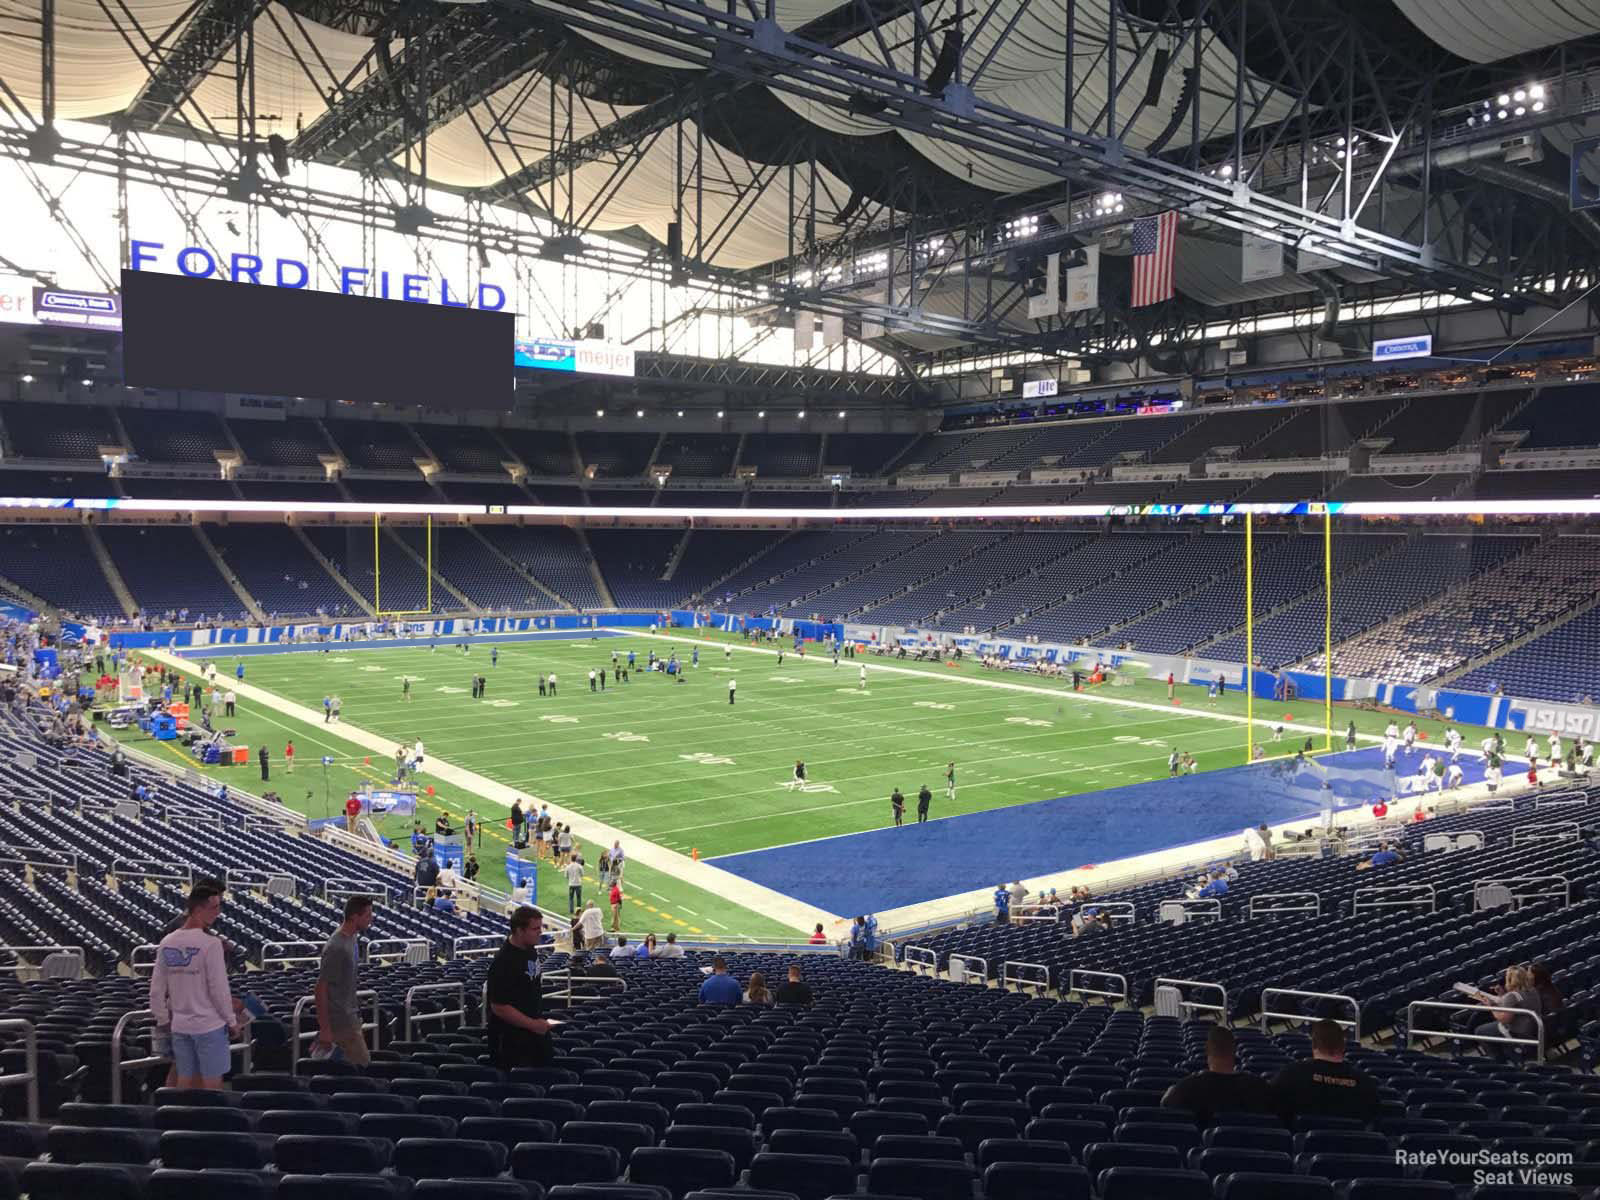 section 113, row 33 seat view  for football - ford field